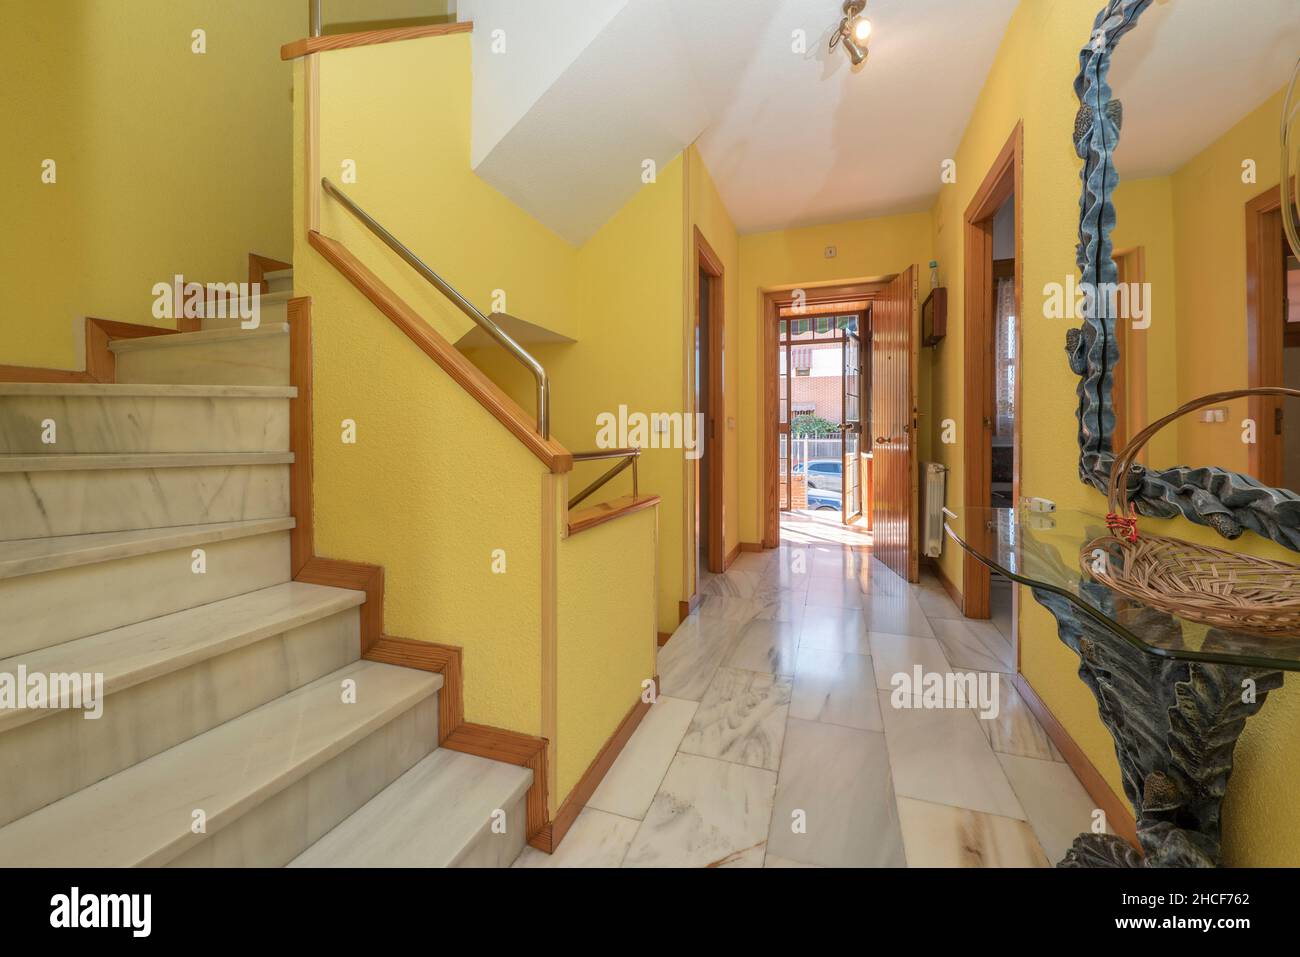 Distributor of multi-storey villa with white marble floors and stairs Stock Photo